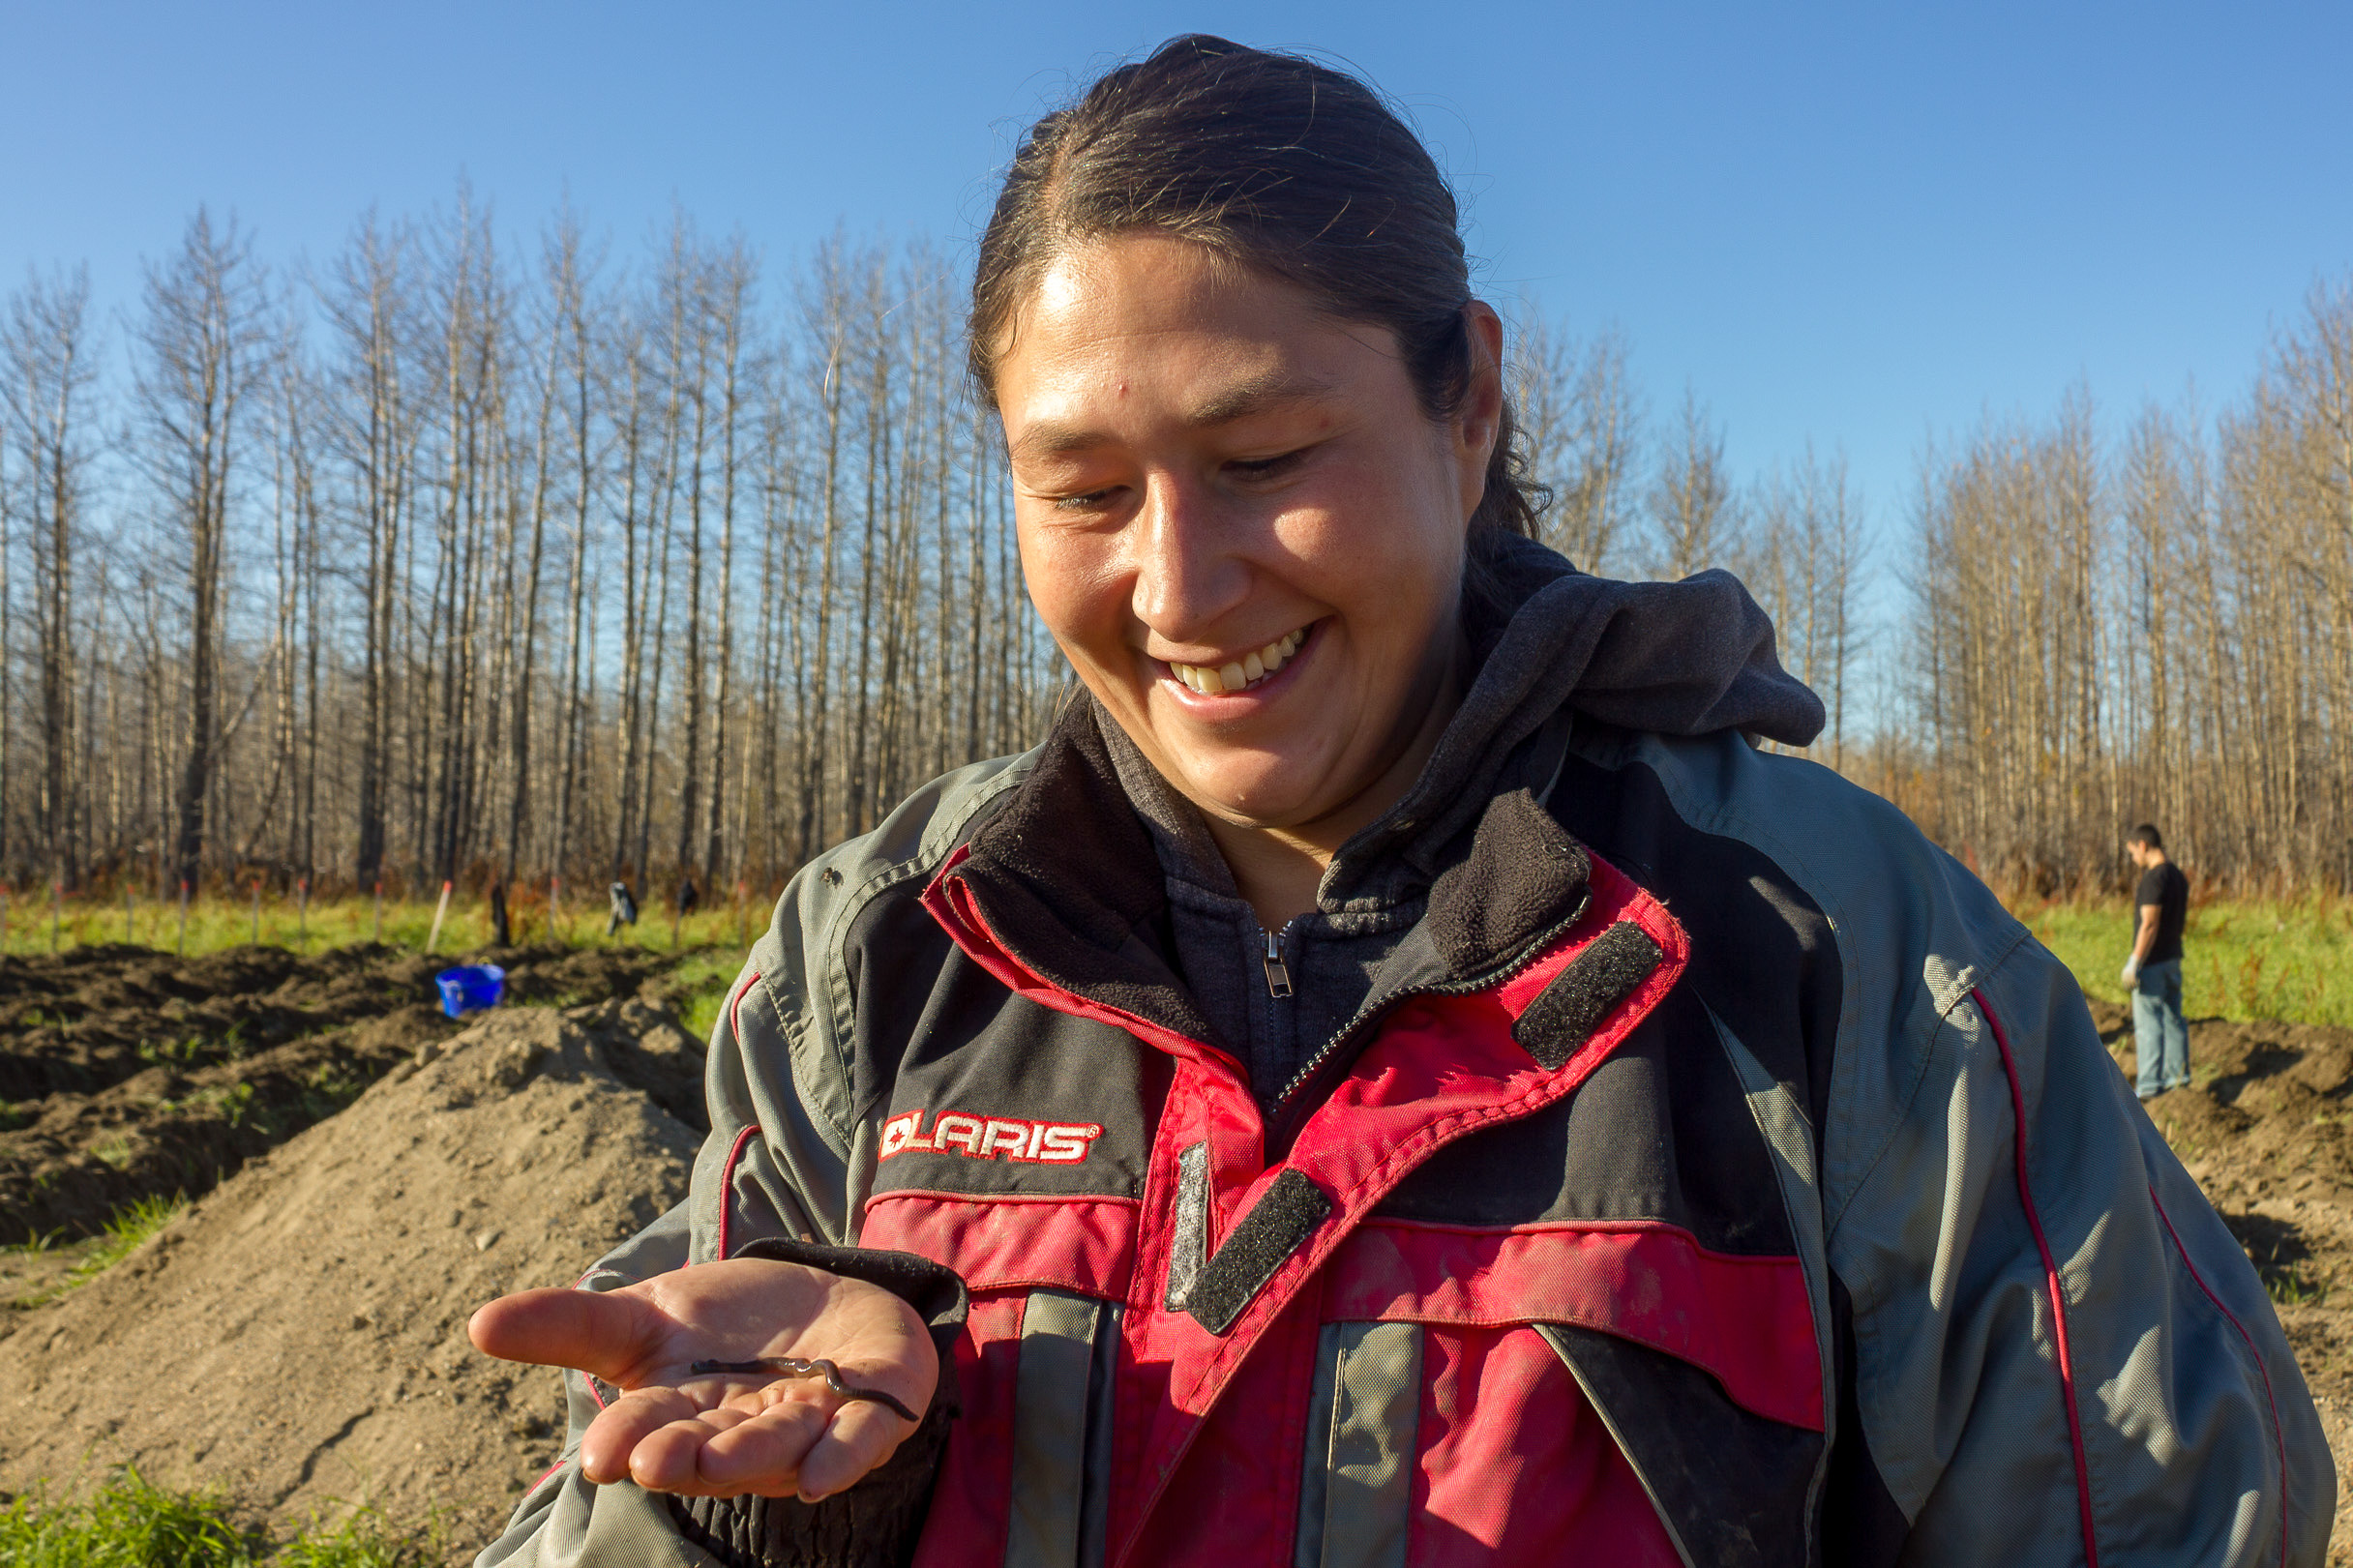 Farm manager smiles at an earthworm in her hand.